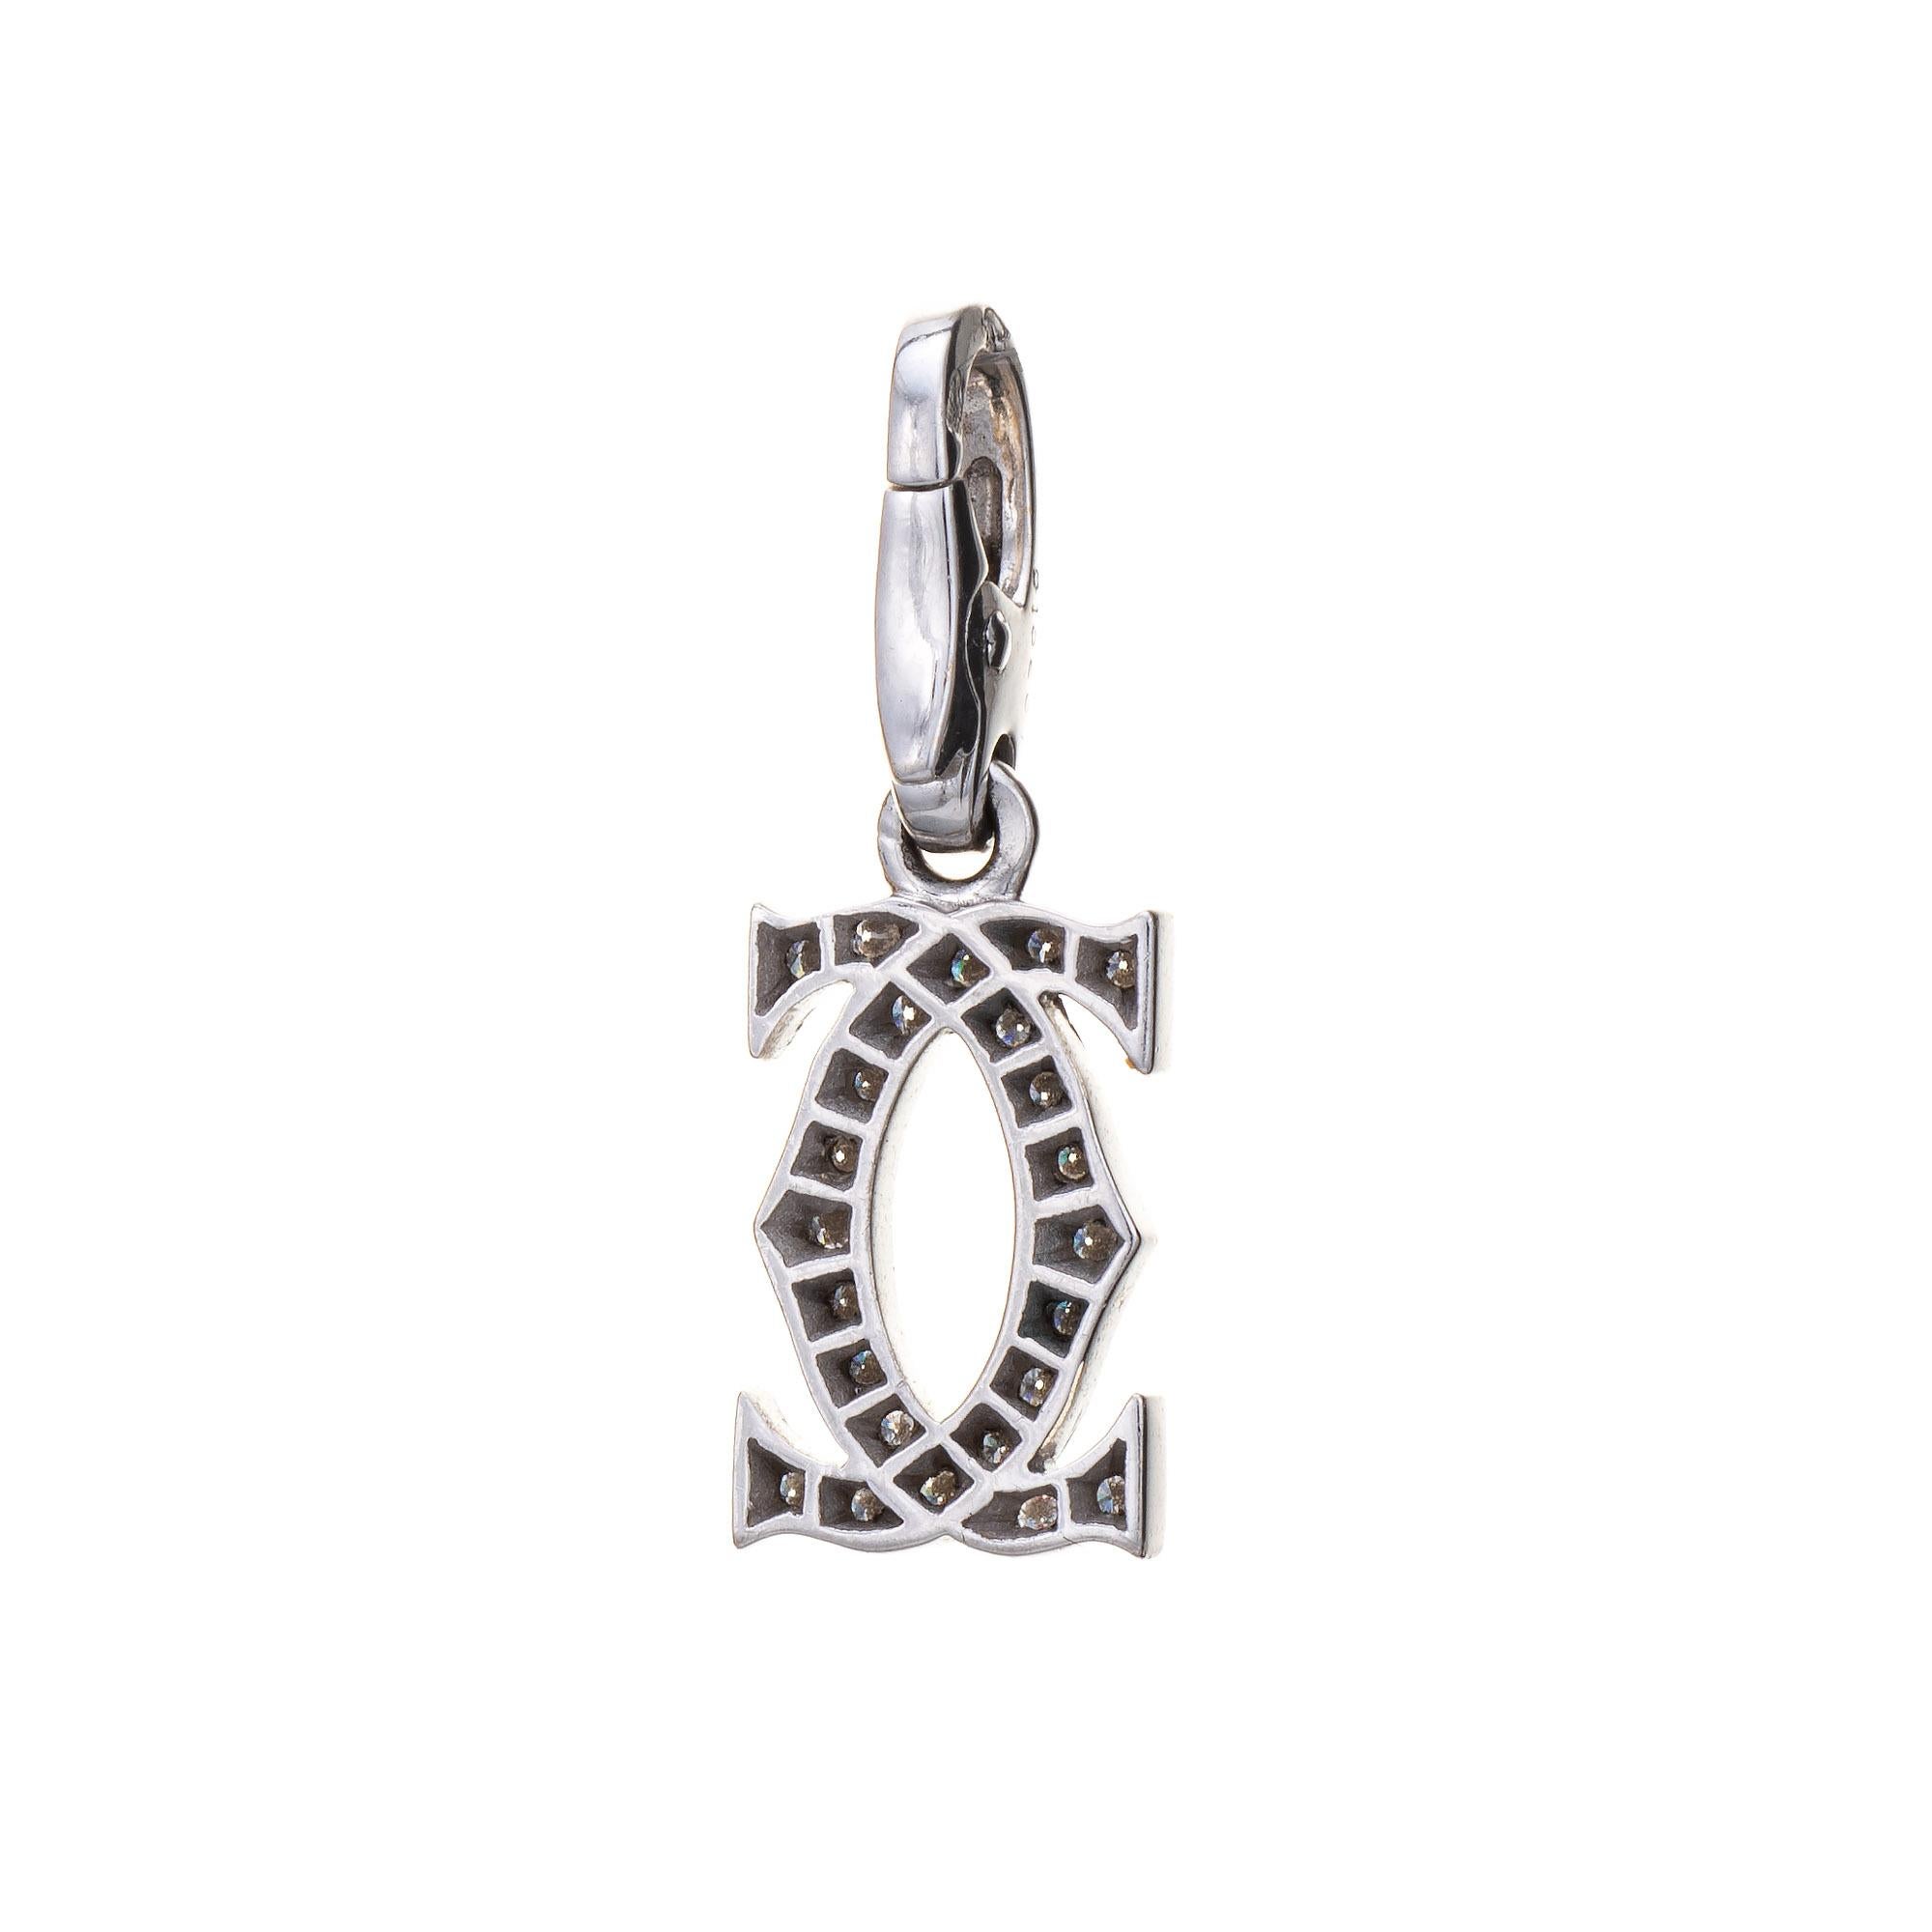 Cartier double C charm (or pendant), crafted in 18 karat white gold.  

Round brilliant cut diamonds total an estimated 0.21 carats (estimated at F-G color and VVS2 clarity). 
The petite double C logo charm is set with shimmering diamonds, great for